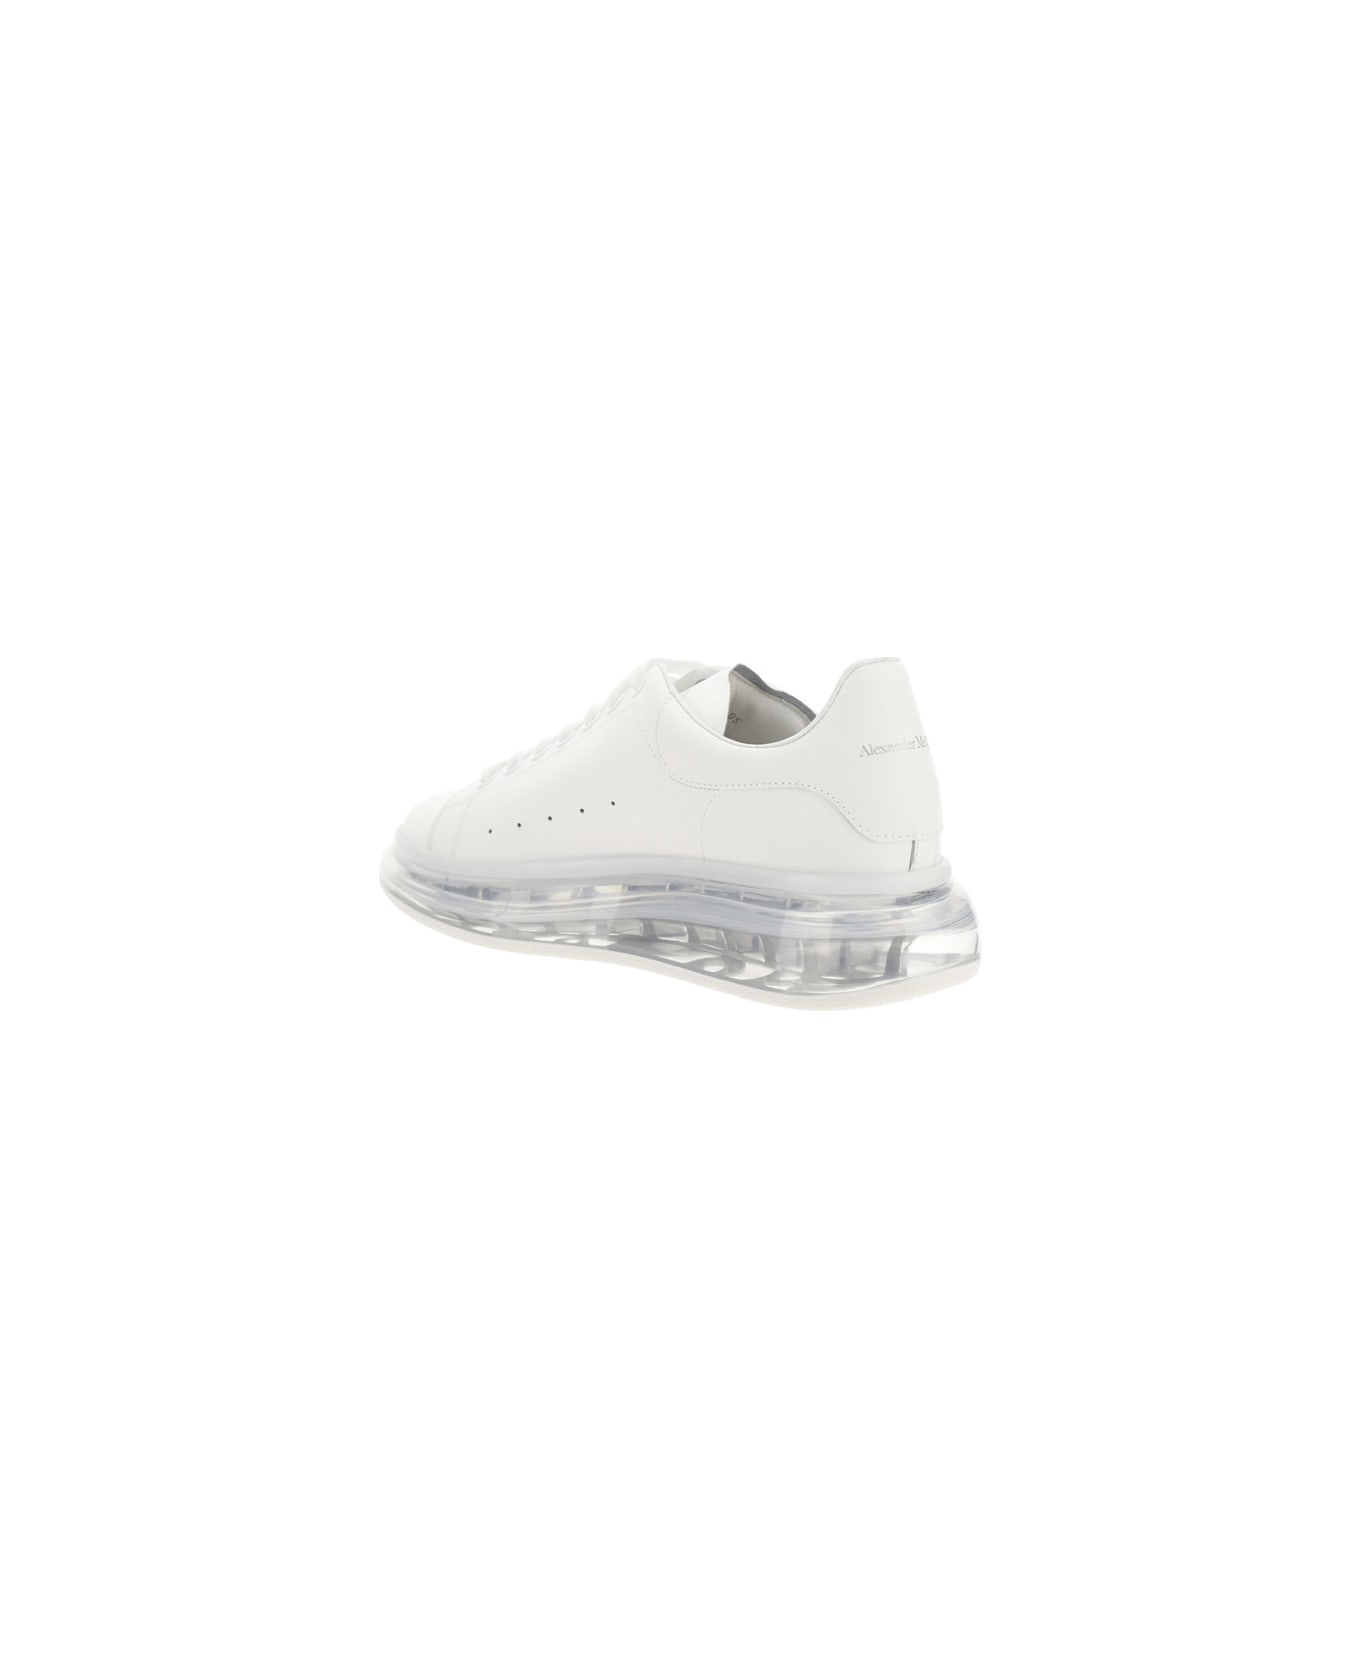 Alexander McQueen Oversized Sole Leather Sneakers - White/white/white